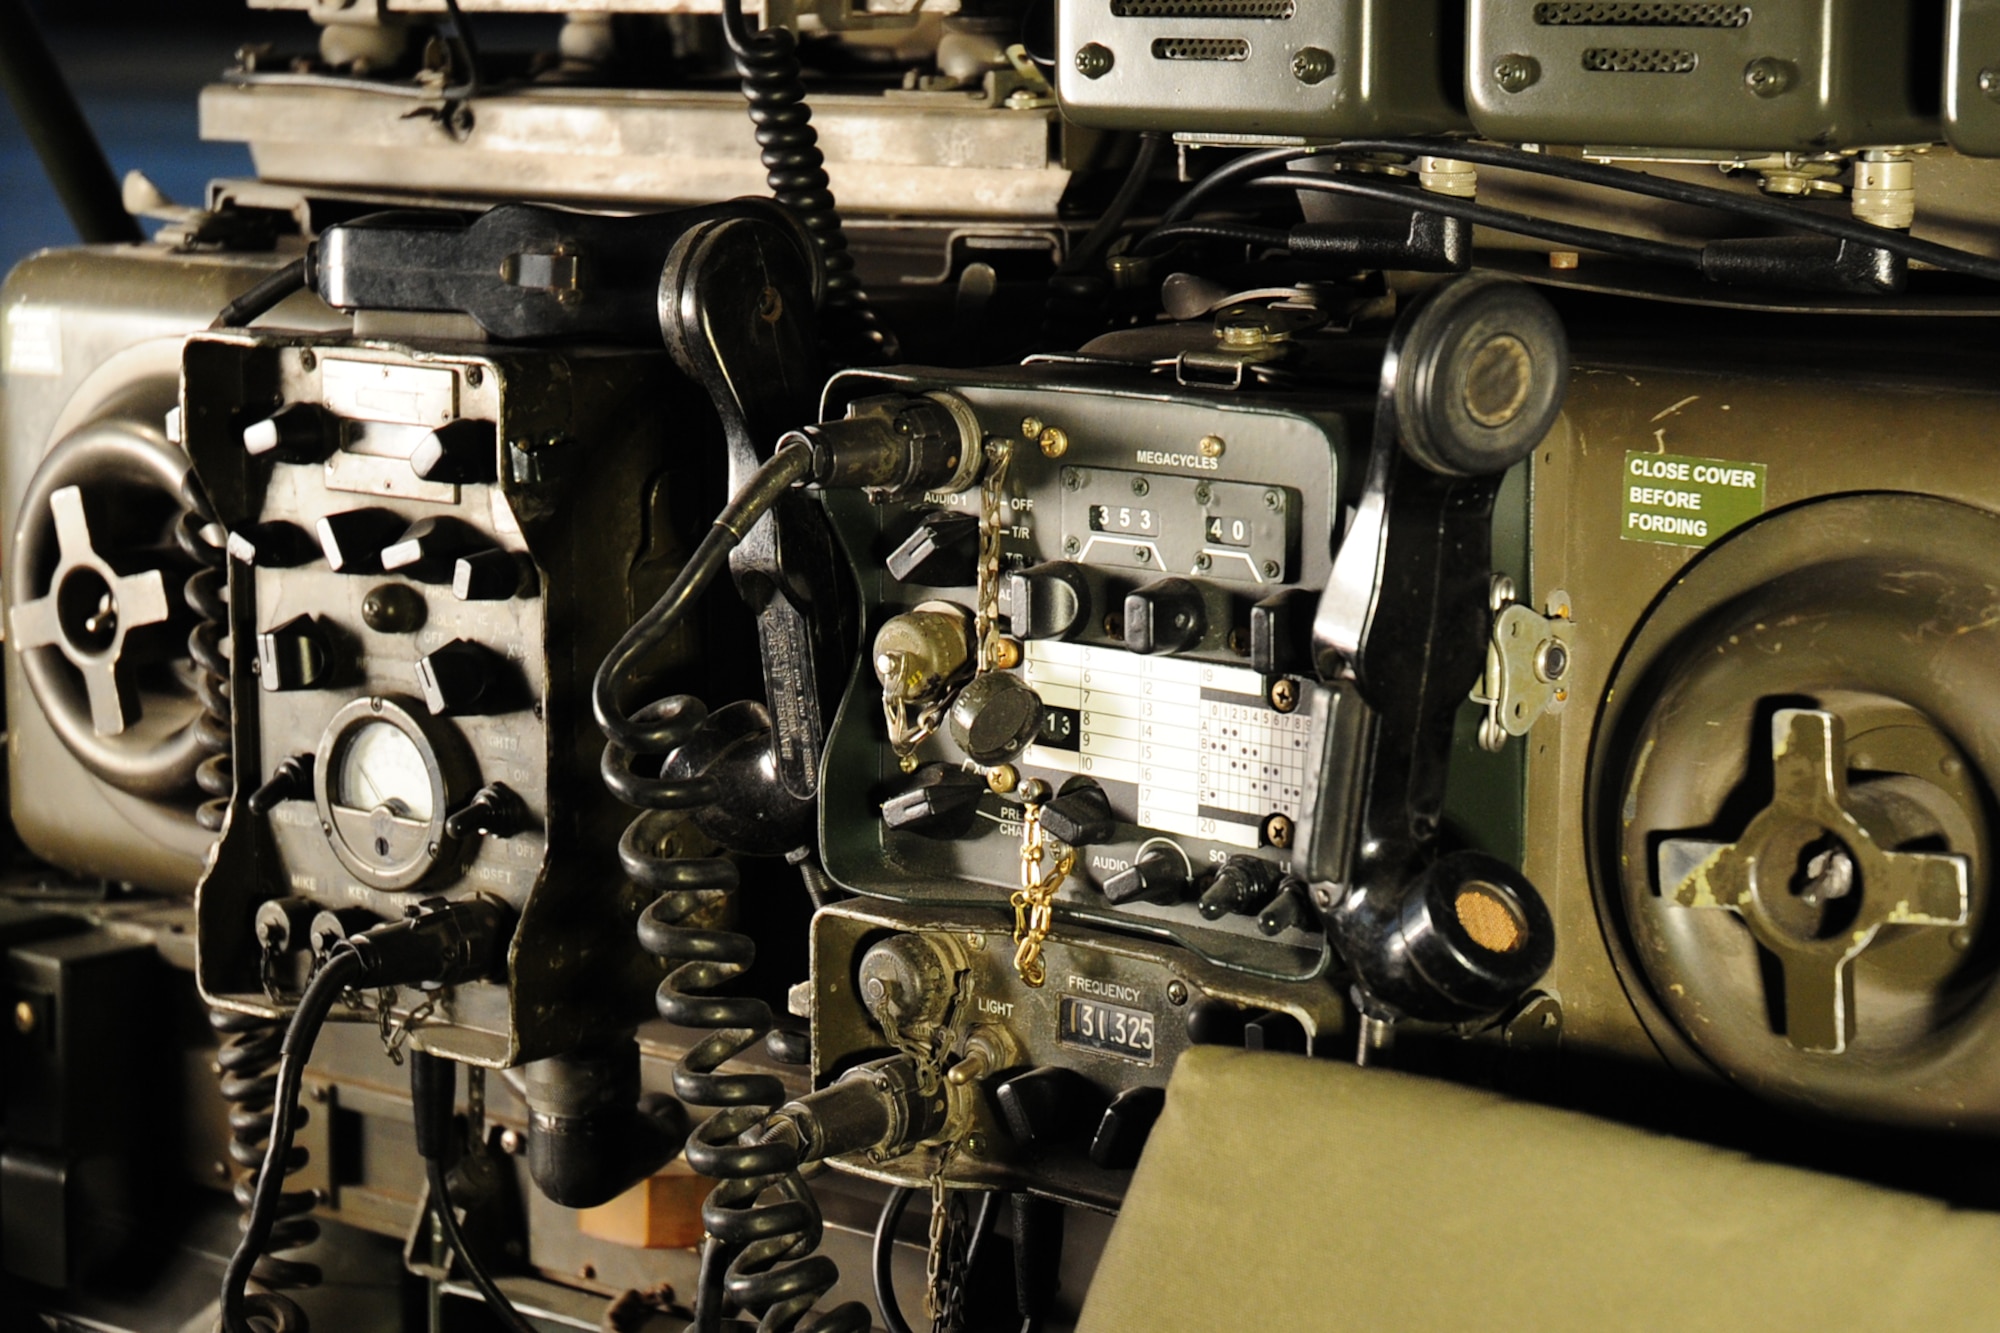 DAYTON, Ohio -- Interior of the AN/MRC-108 Communication System on display in the Southeast Asia War Gallery at the National Museum of the U.S. Air Force. (U.S. Air Force photo)